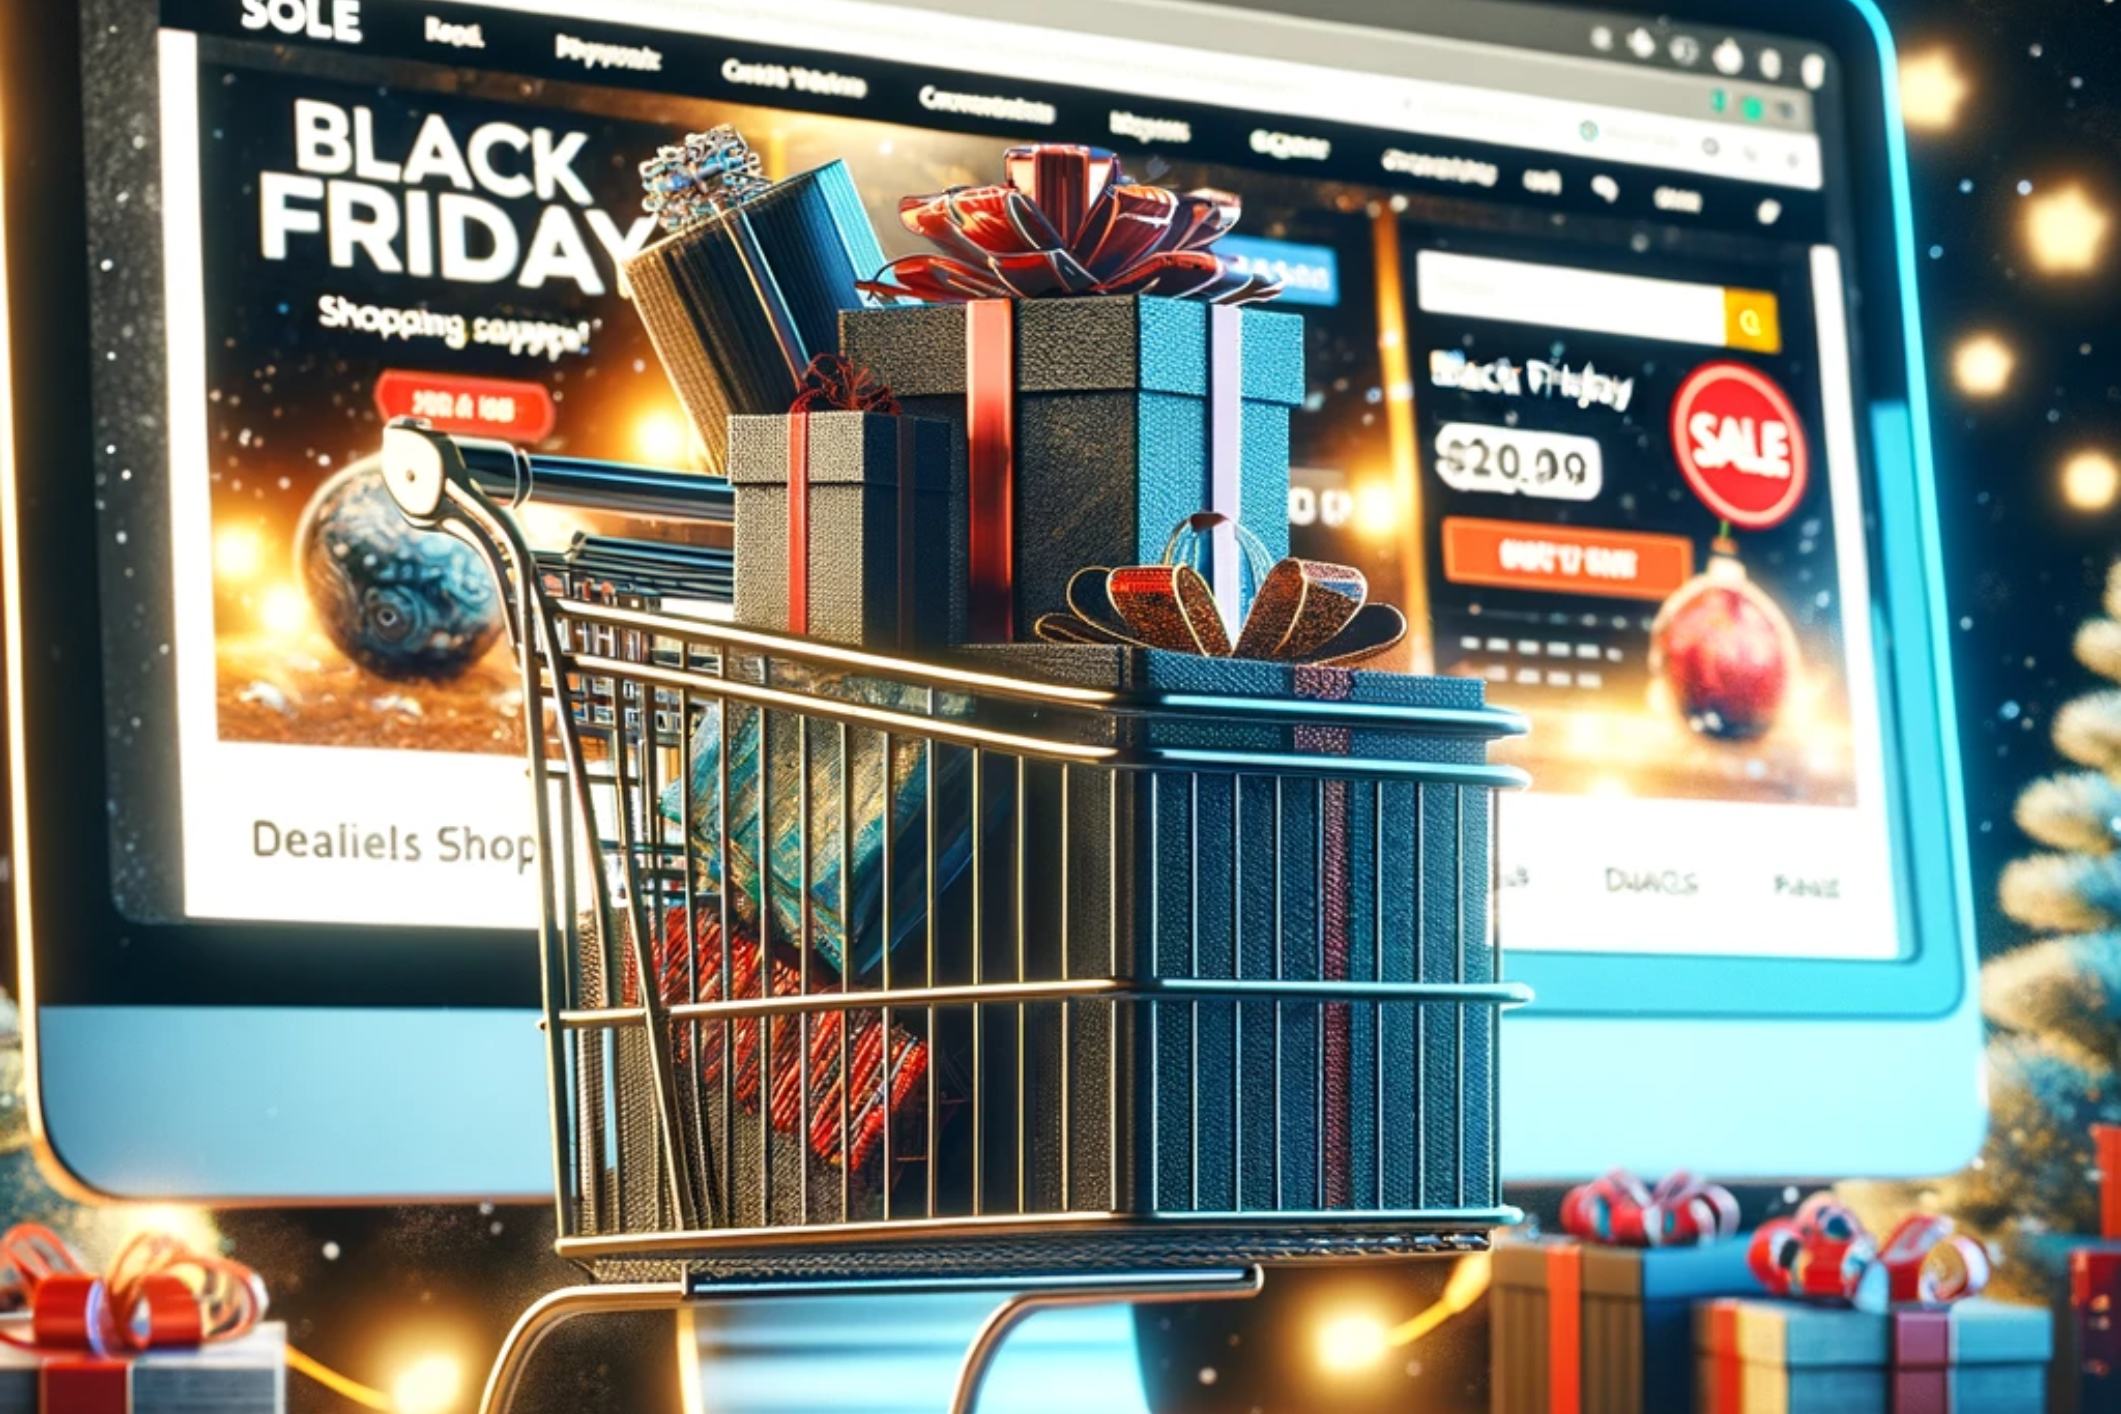 Abandoned Carts on Black Friday? Here’s How To Recover Them